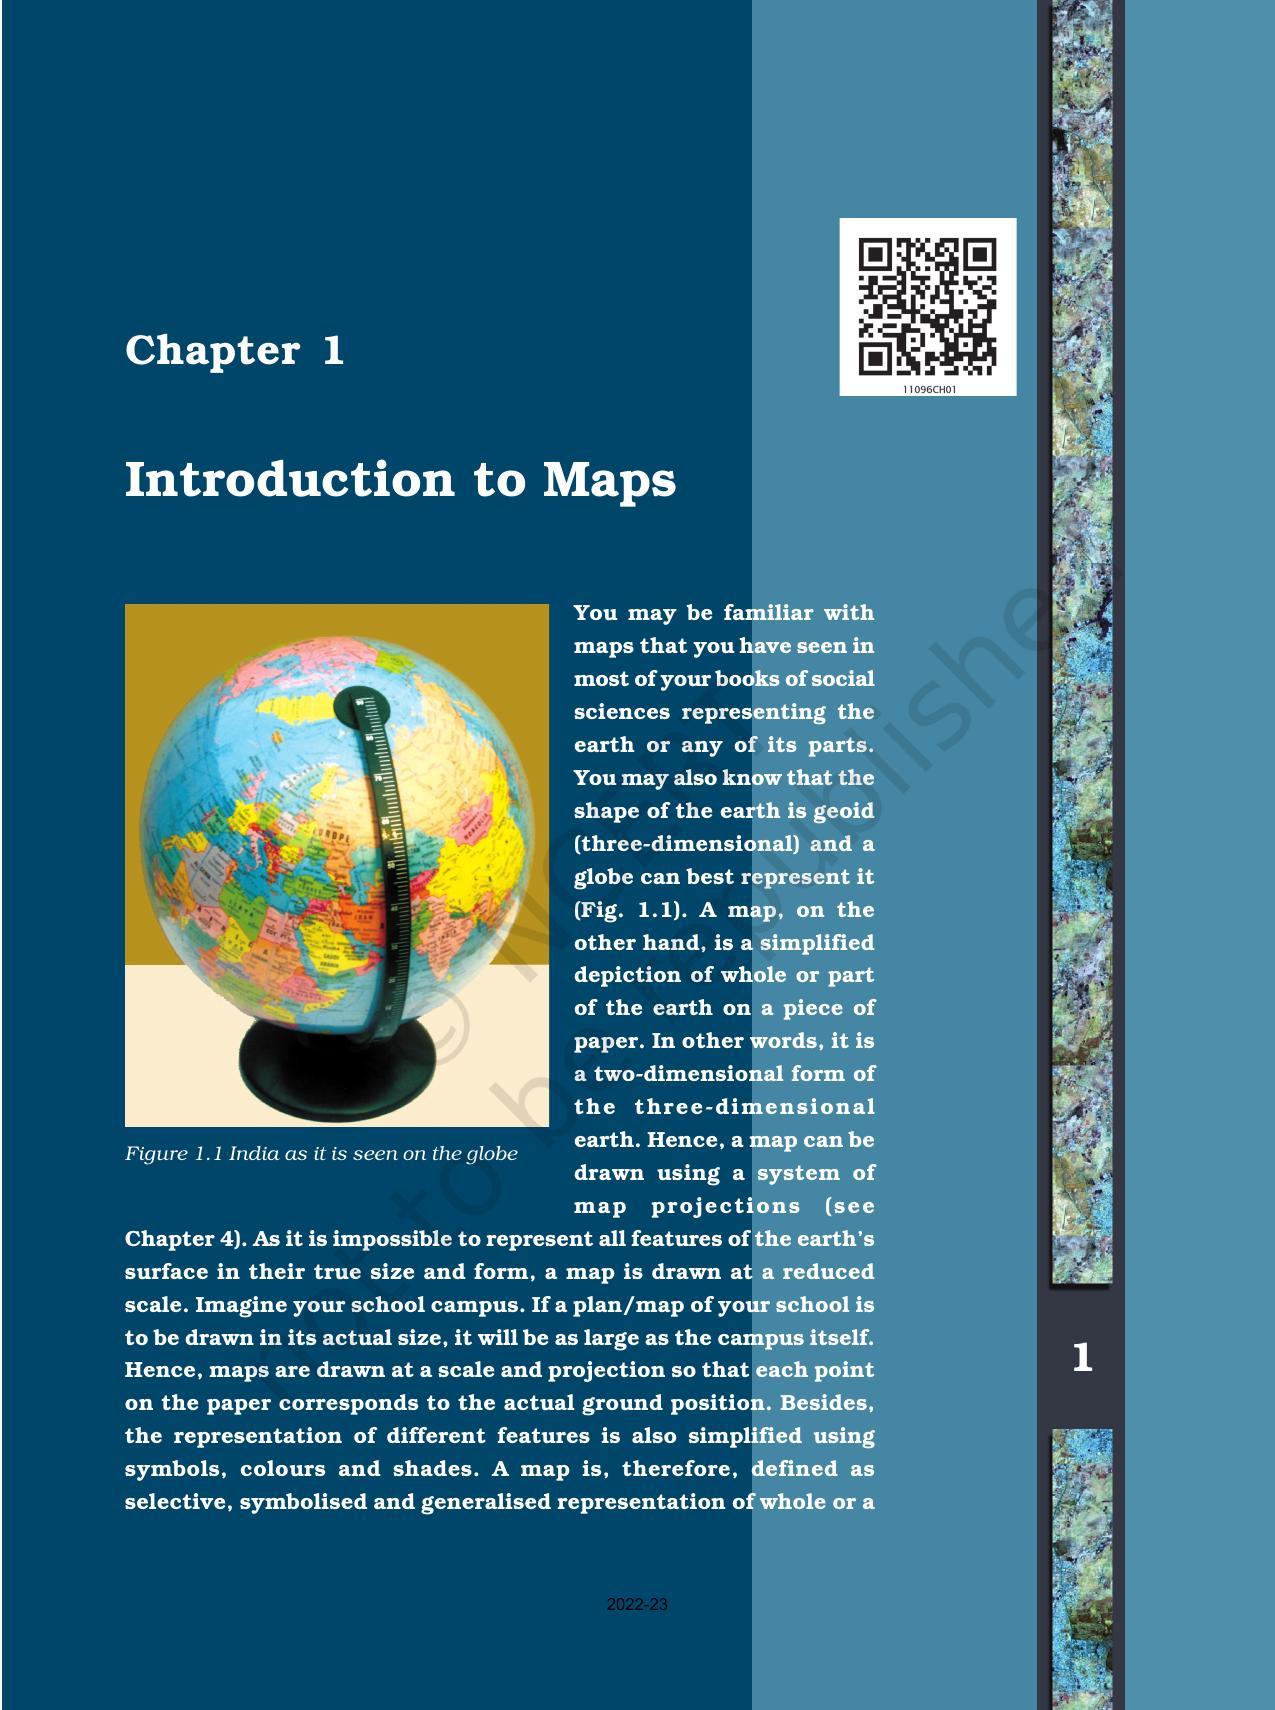 NCERT Book for Class 11 Geography (Part-III) Chapter 1 Introduction to Maps - Page 1